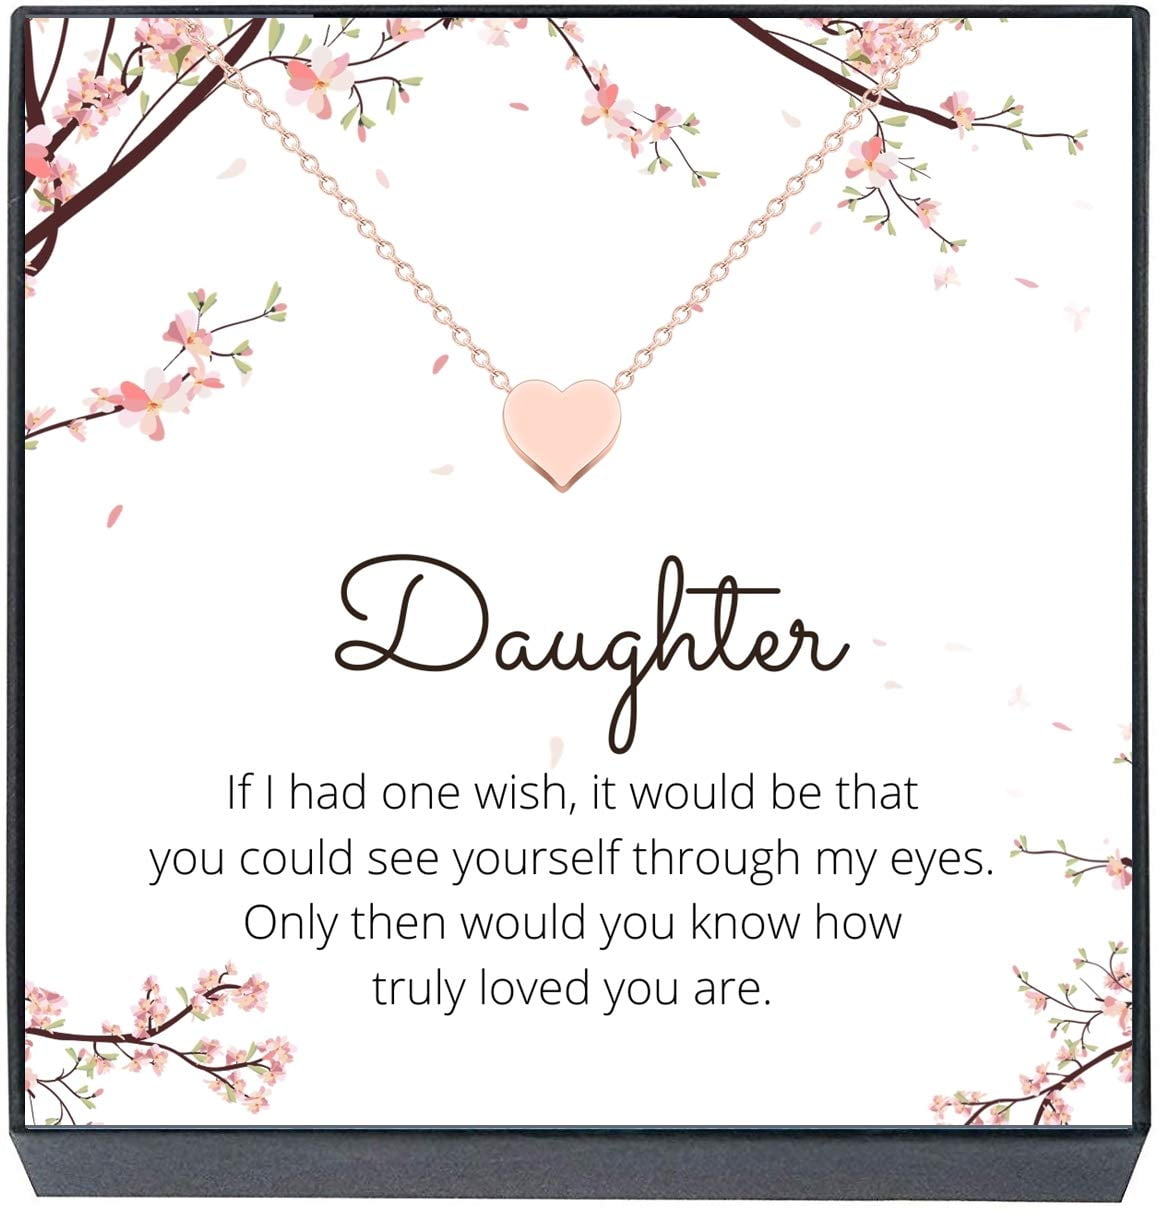 Inspirational Christmas Gifts for Daughter Keychain Stocking Stuffers for Her from Mom Dad Father to Daughter Teen Adult Women Teenage Girls Kids Birthday Gradation Bride Wedding Gifts Presents 